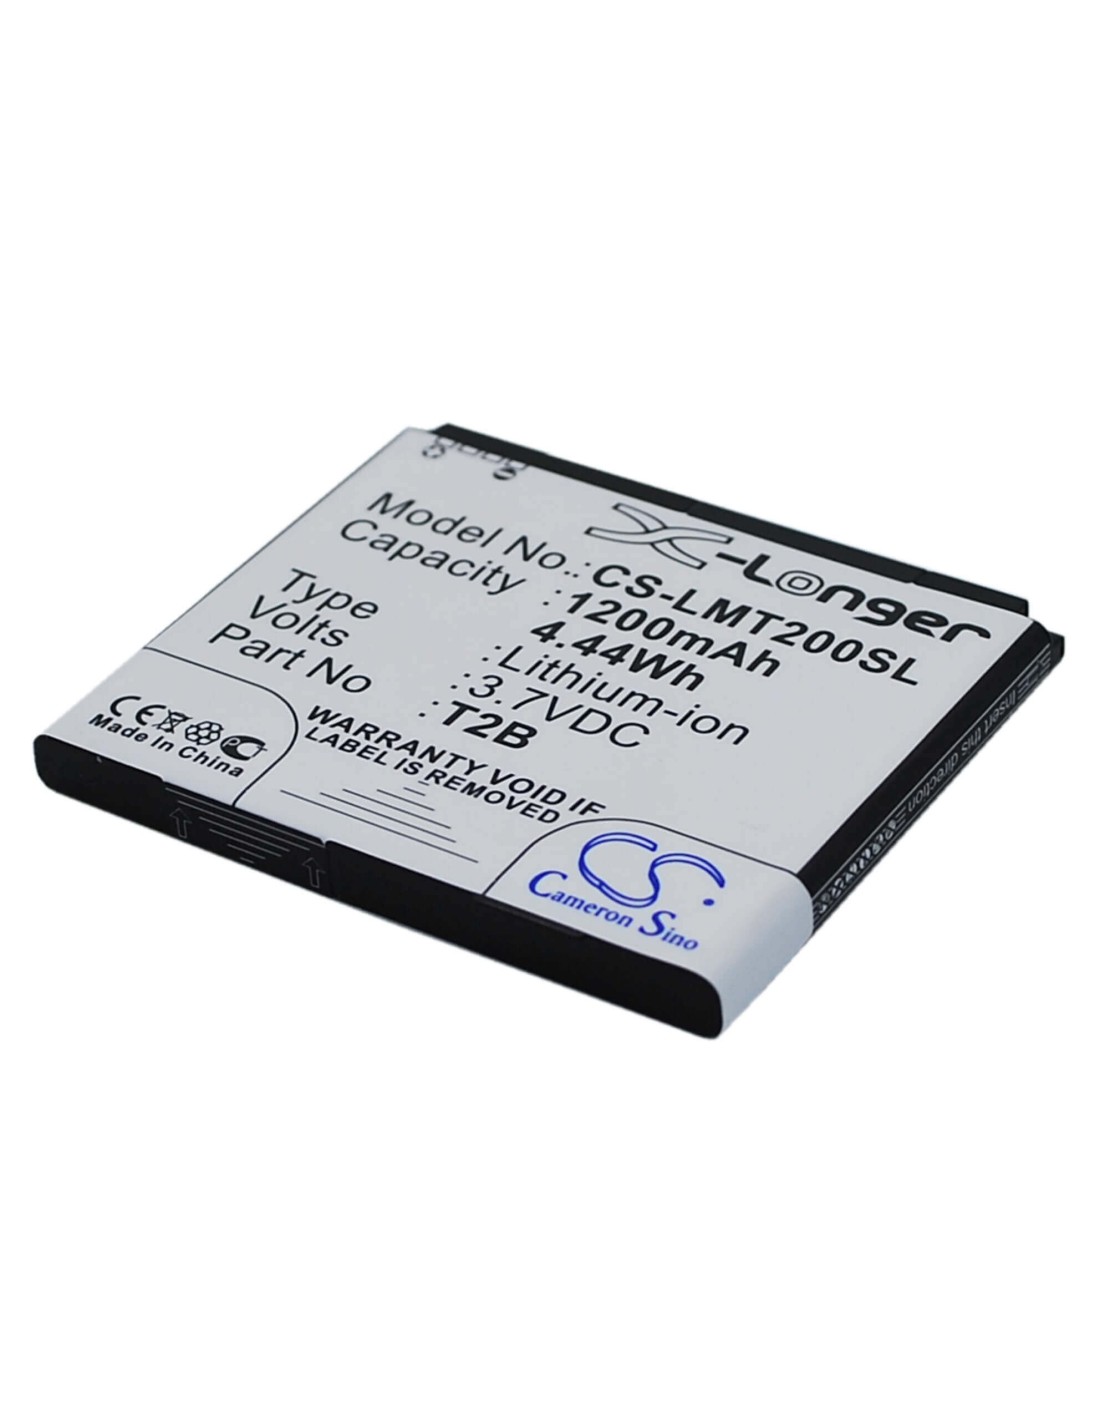 Battery for Lumigon T2 3.7V, 1200mAh - 4.44Wh